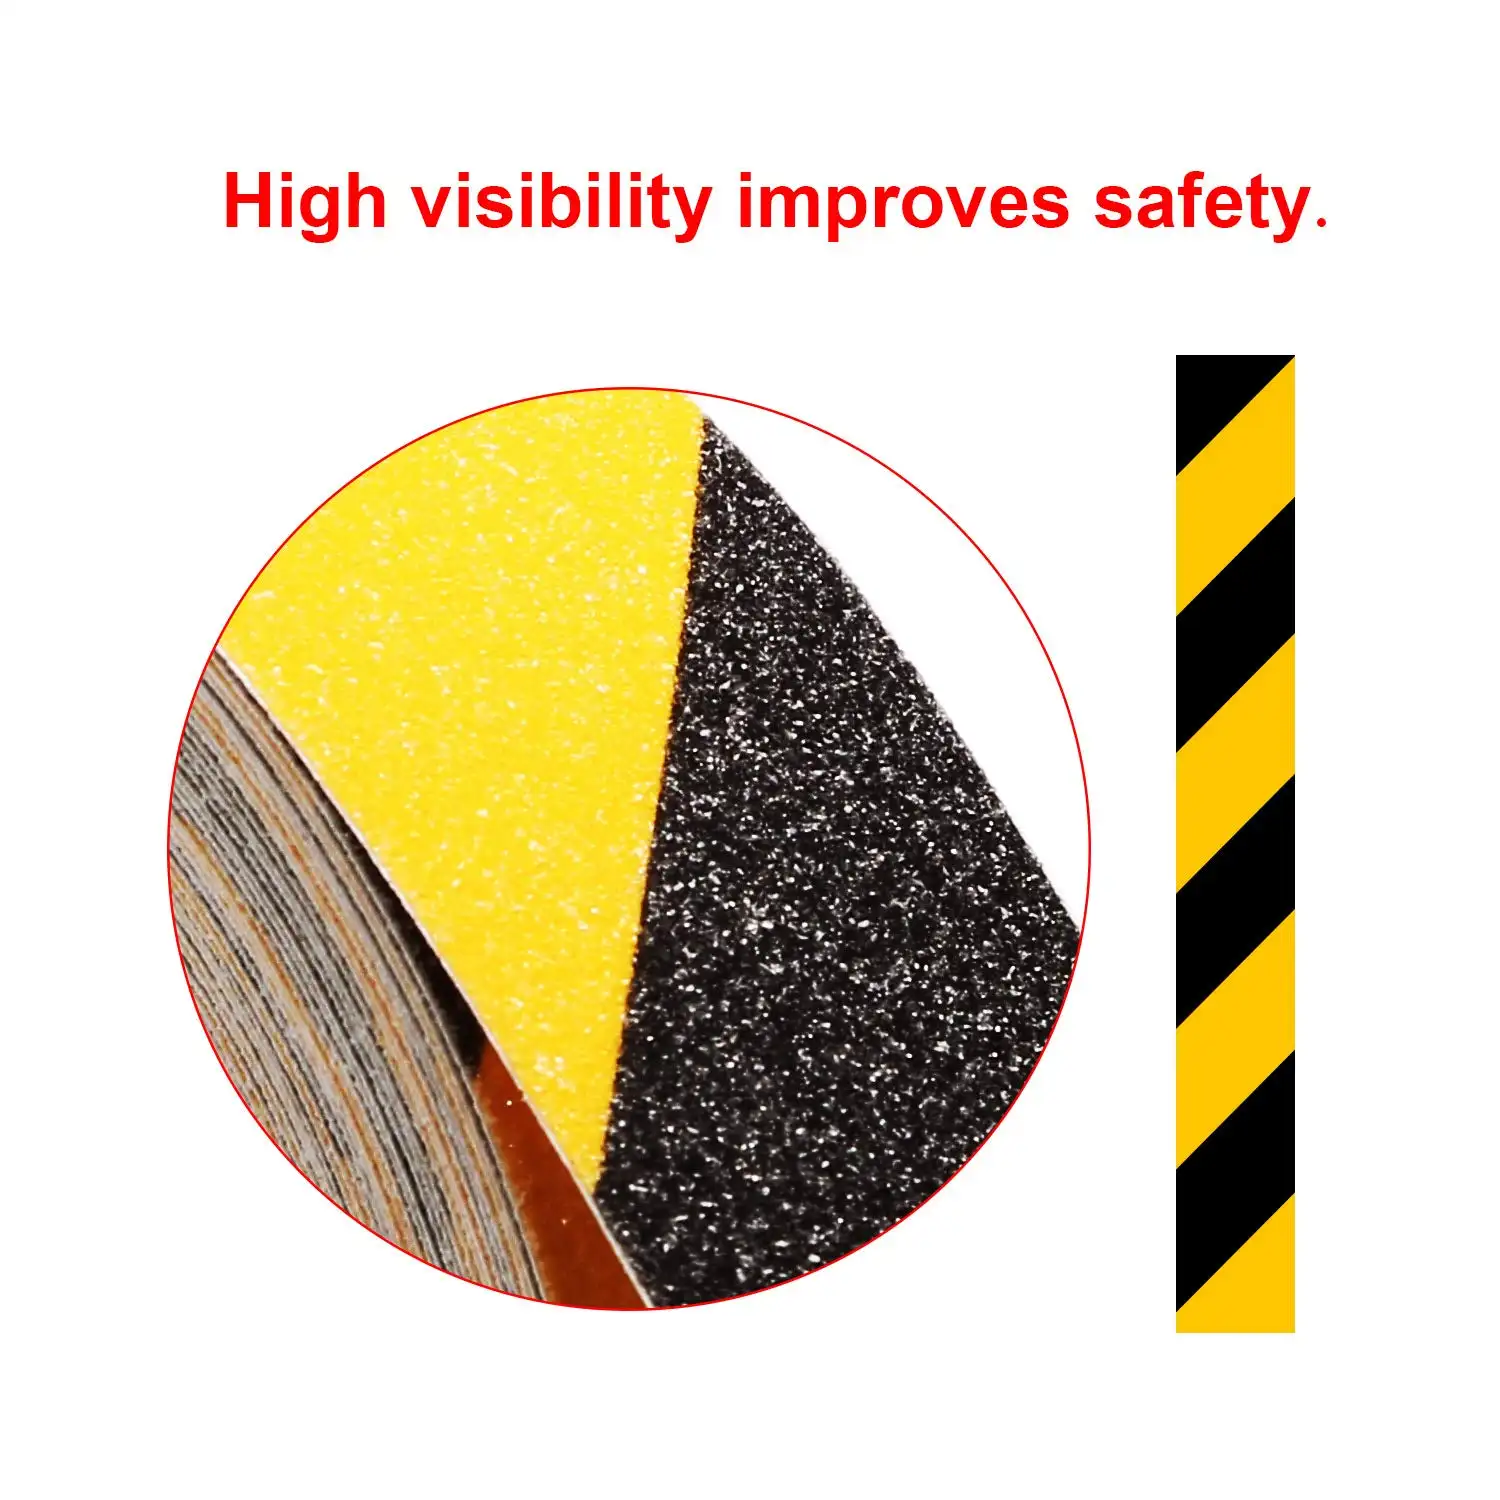 Anti Slip Safety Grip Tape Non Skid Tread for Stairs  Steps  Floors  Caution Dangerous Zones  Indoor and Outdoor Use